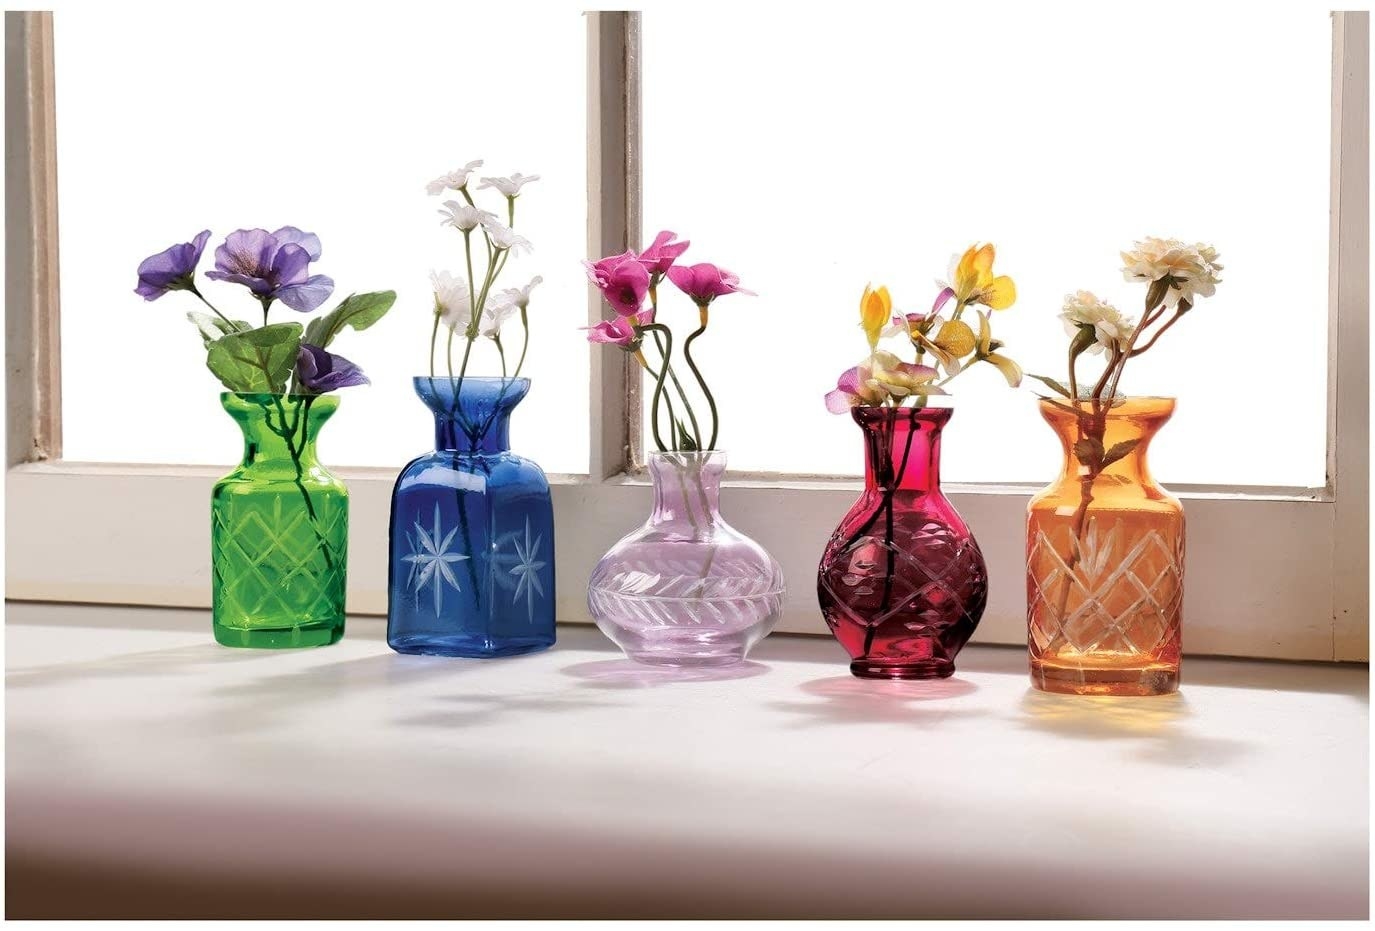 The set of colorful vases up against a window